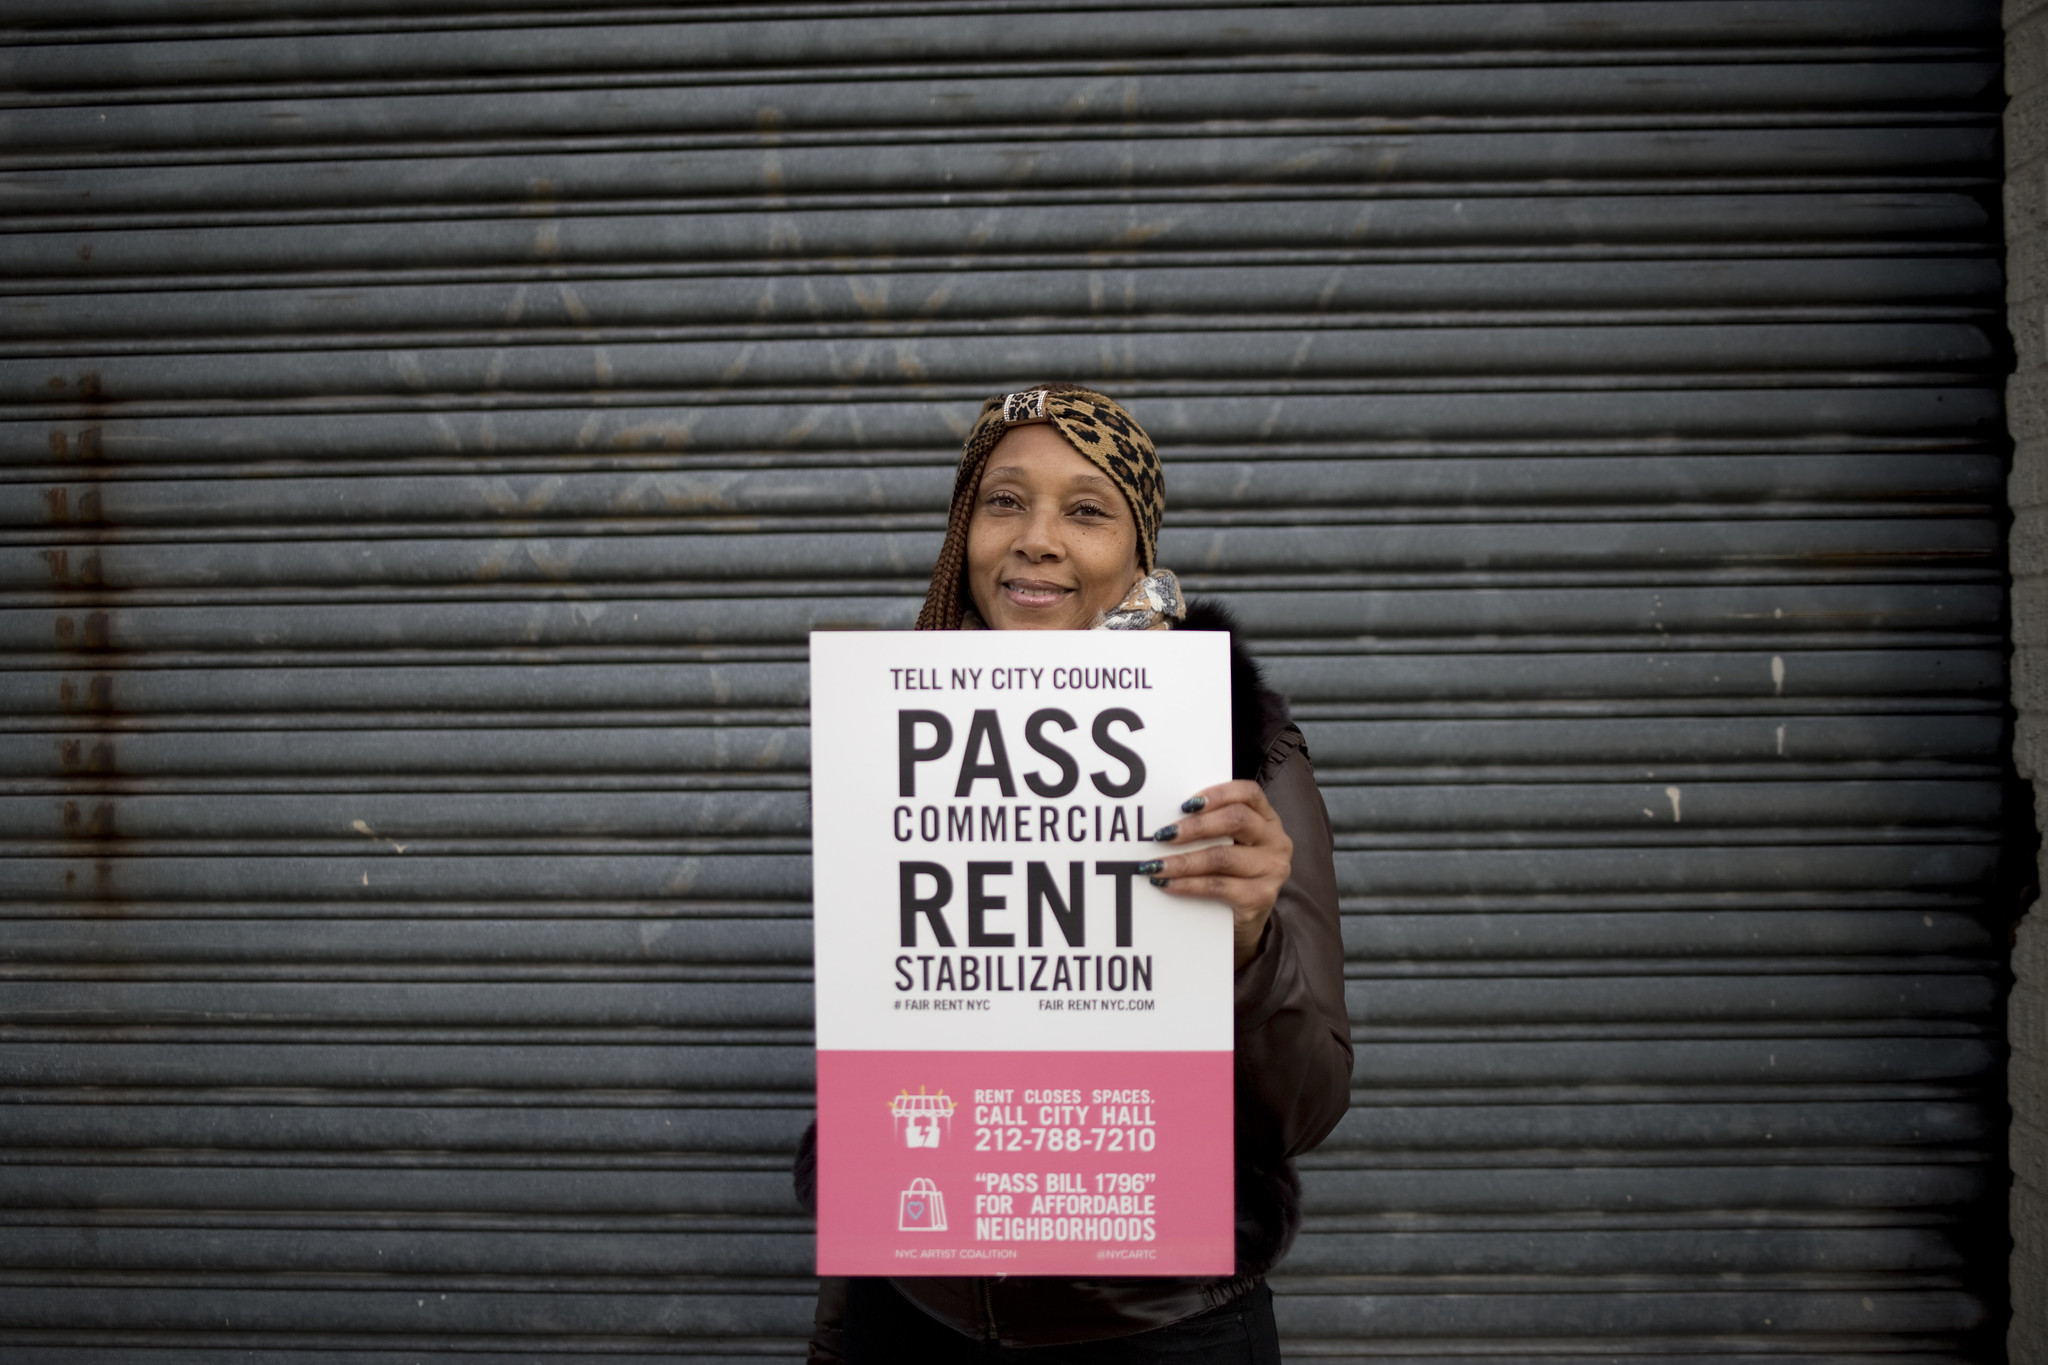 Pass Commercial Rent Stabilization